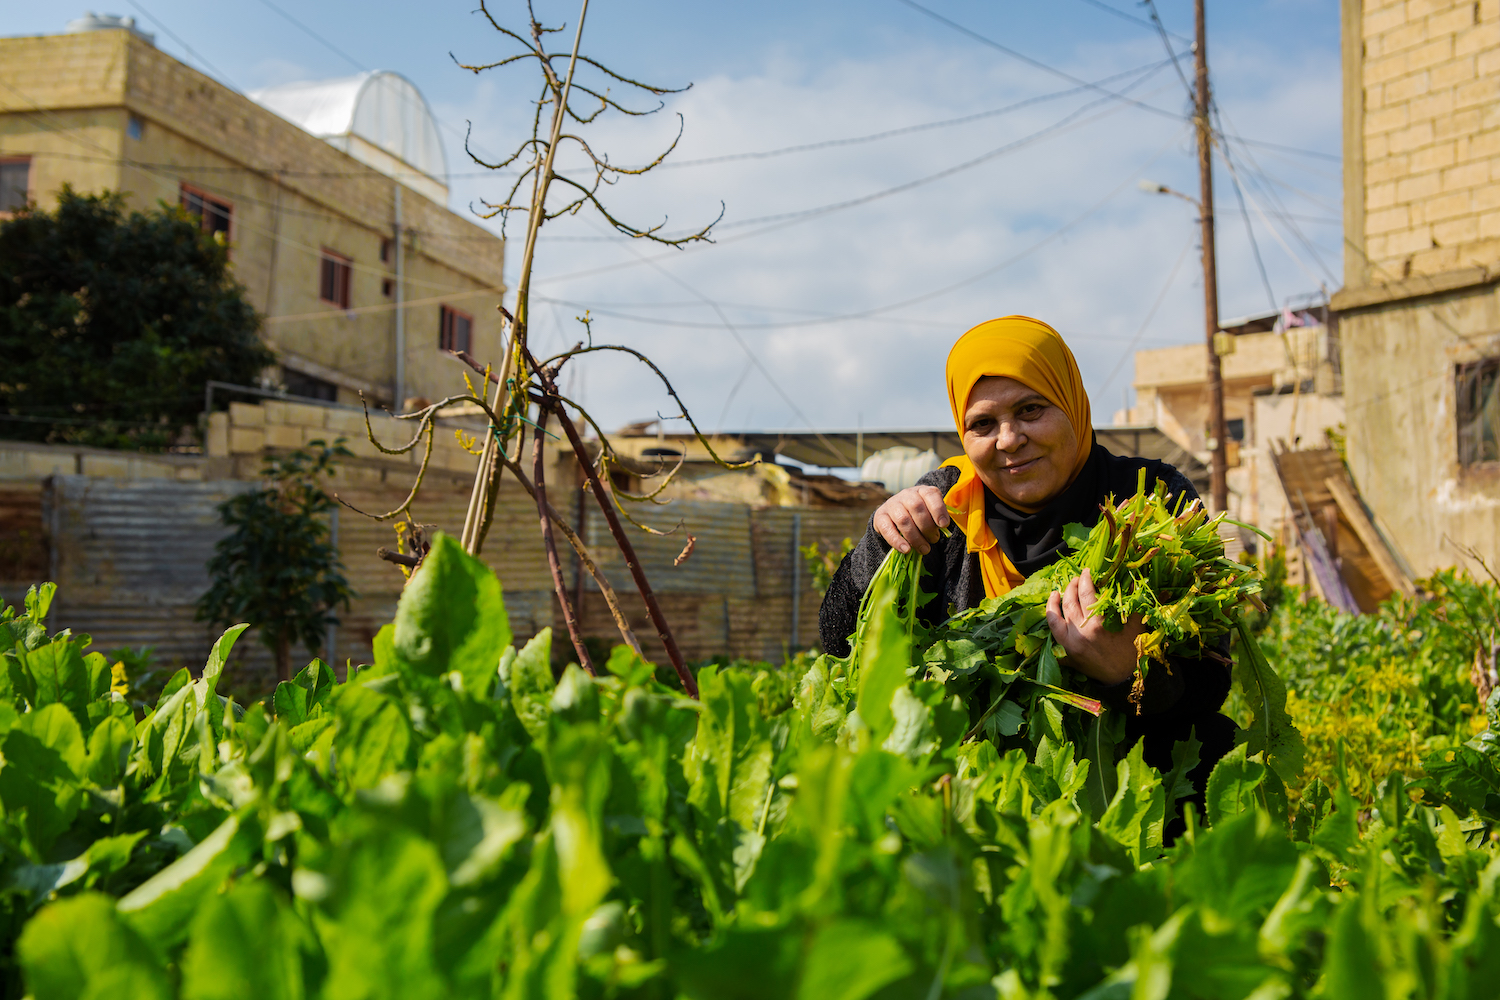 A woman in a vegetable garden holding harvested greens.